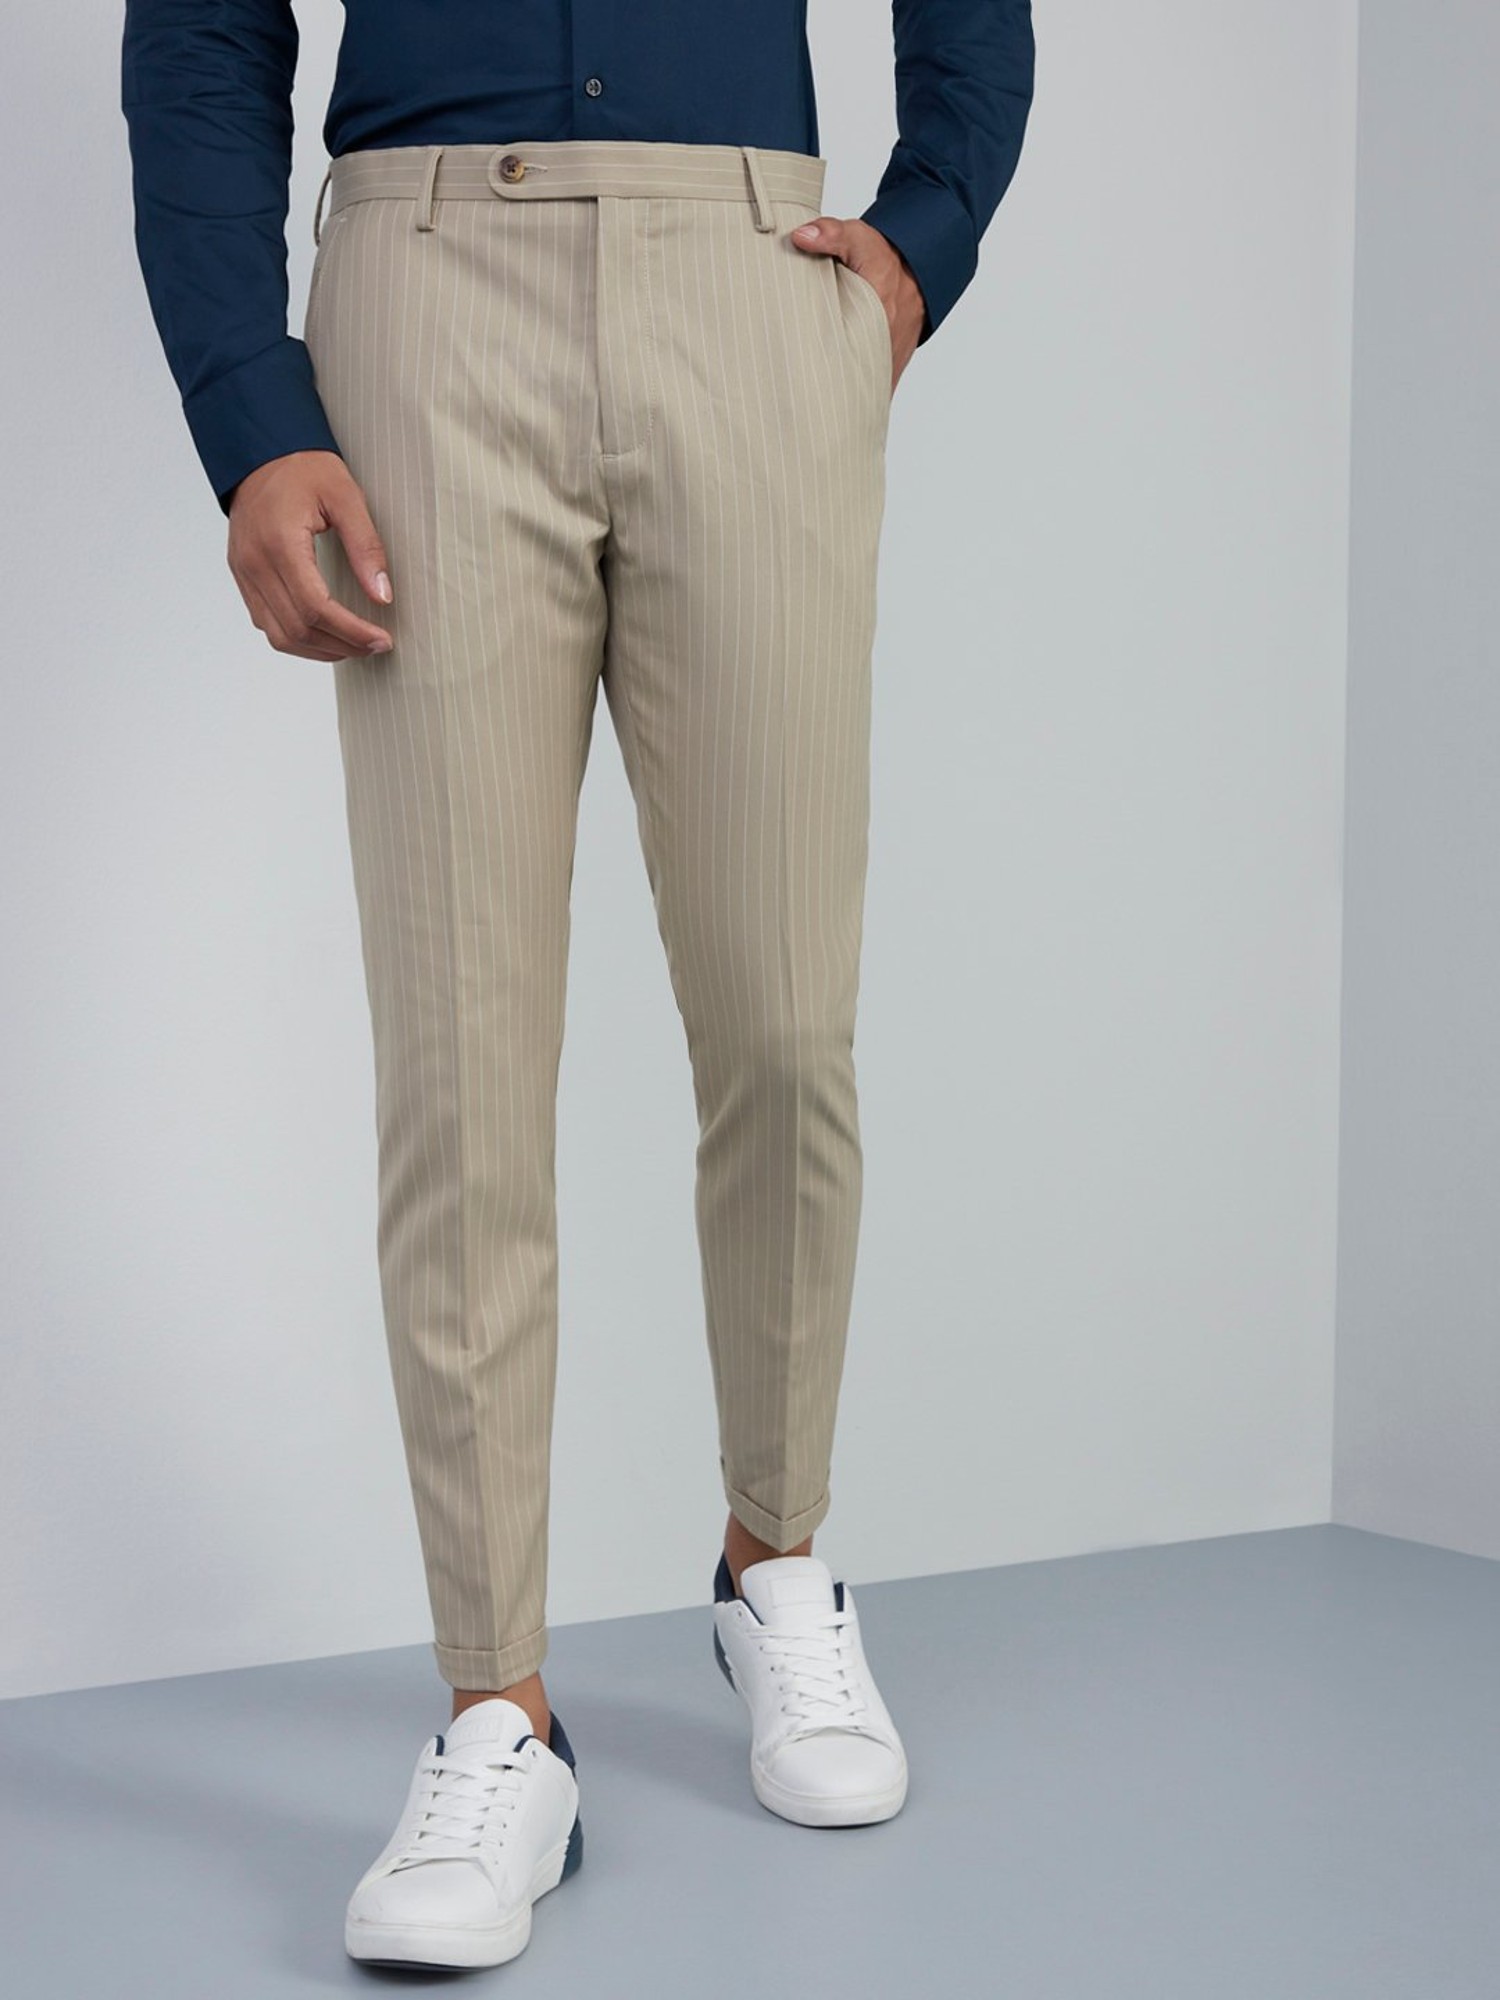 CARROT FIT TROUSERS WITH DARTS DETAIL - Black | ZARA United Kingdom